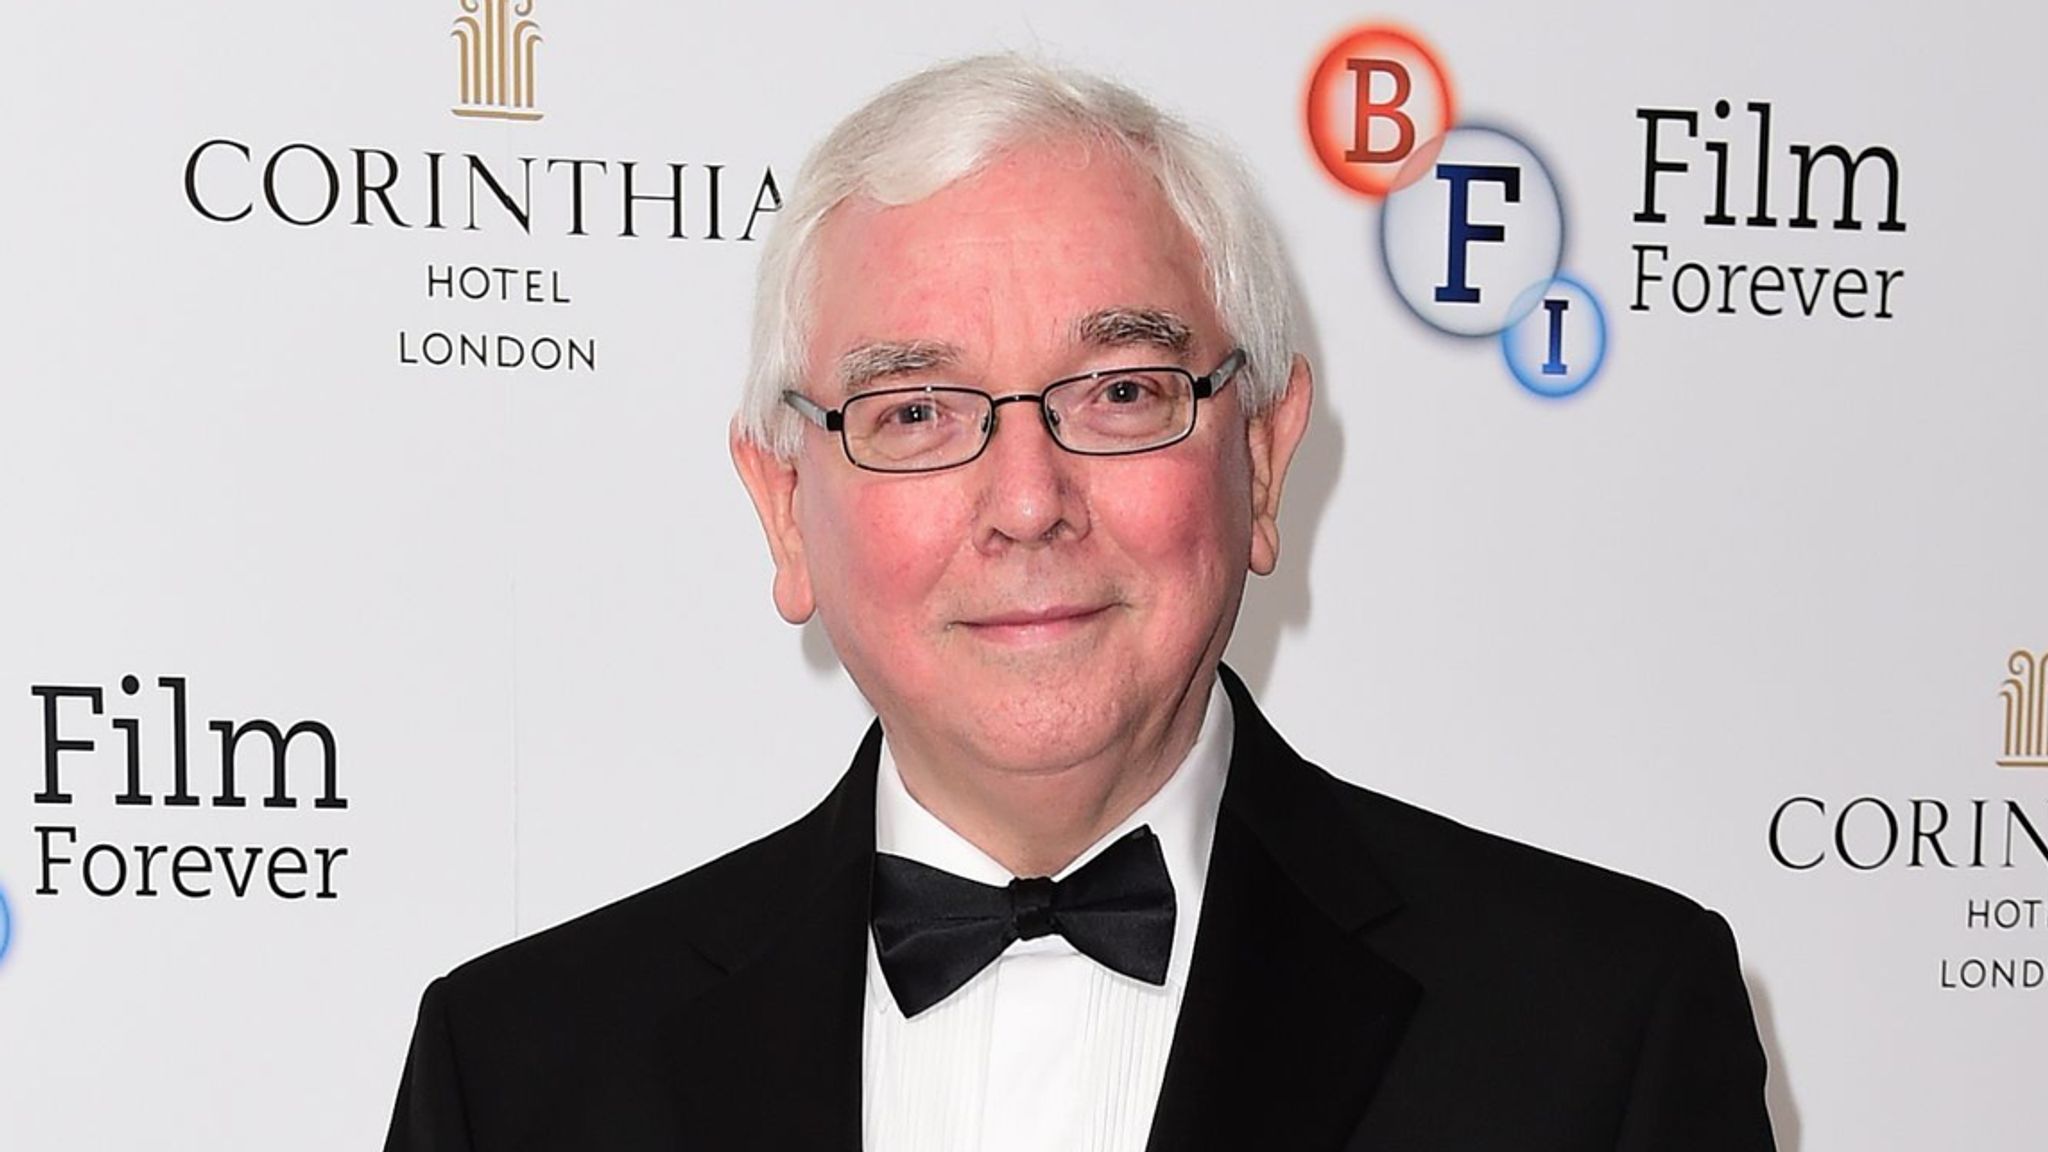 Terence Davies Screenwriter and director passes away at the age of 77.